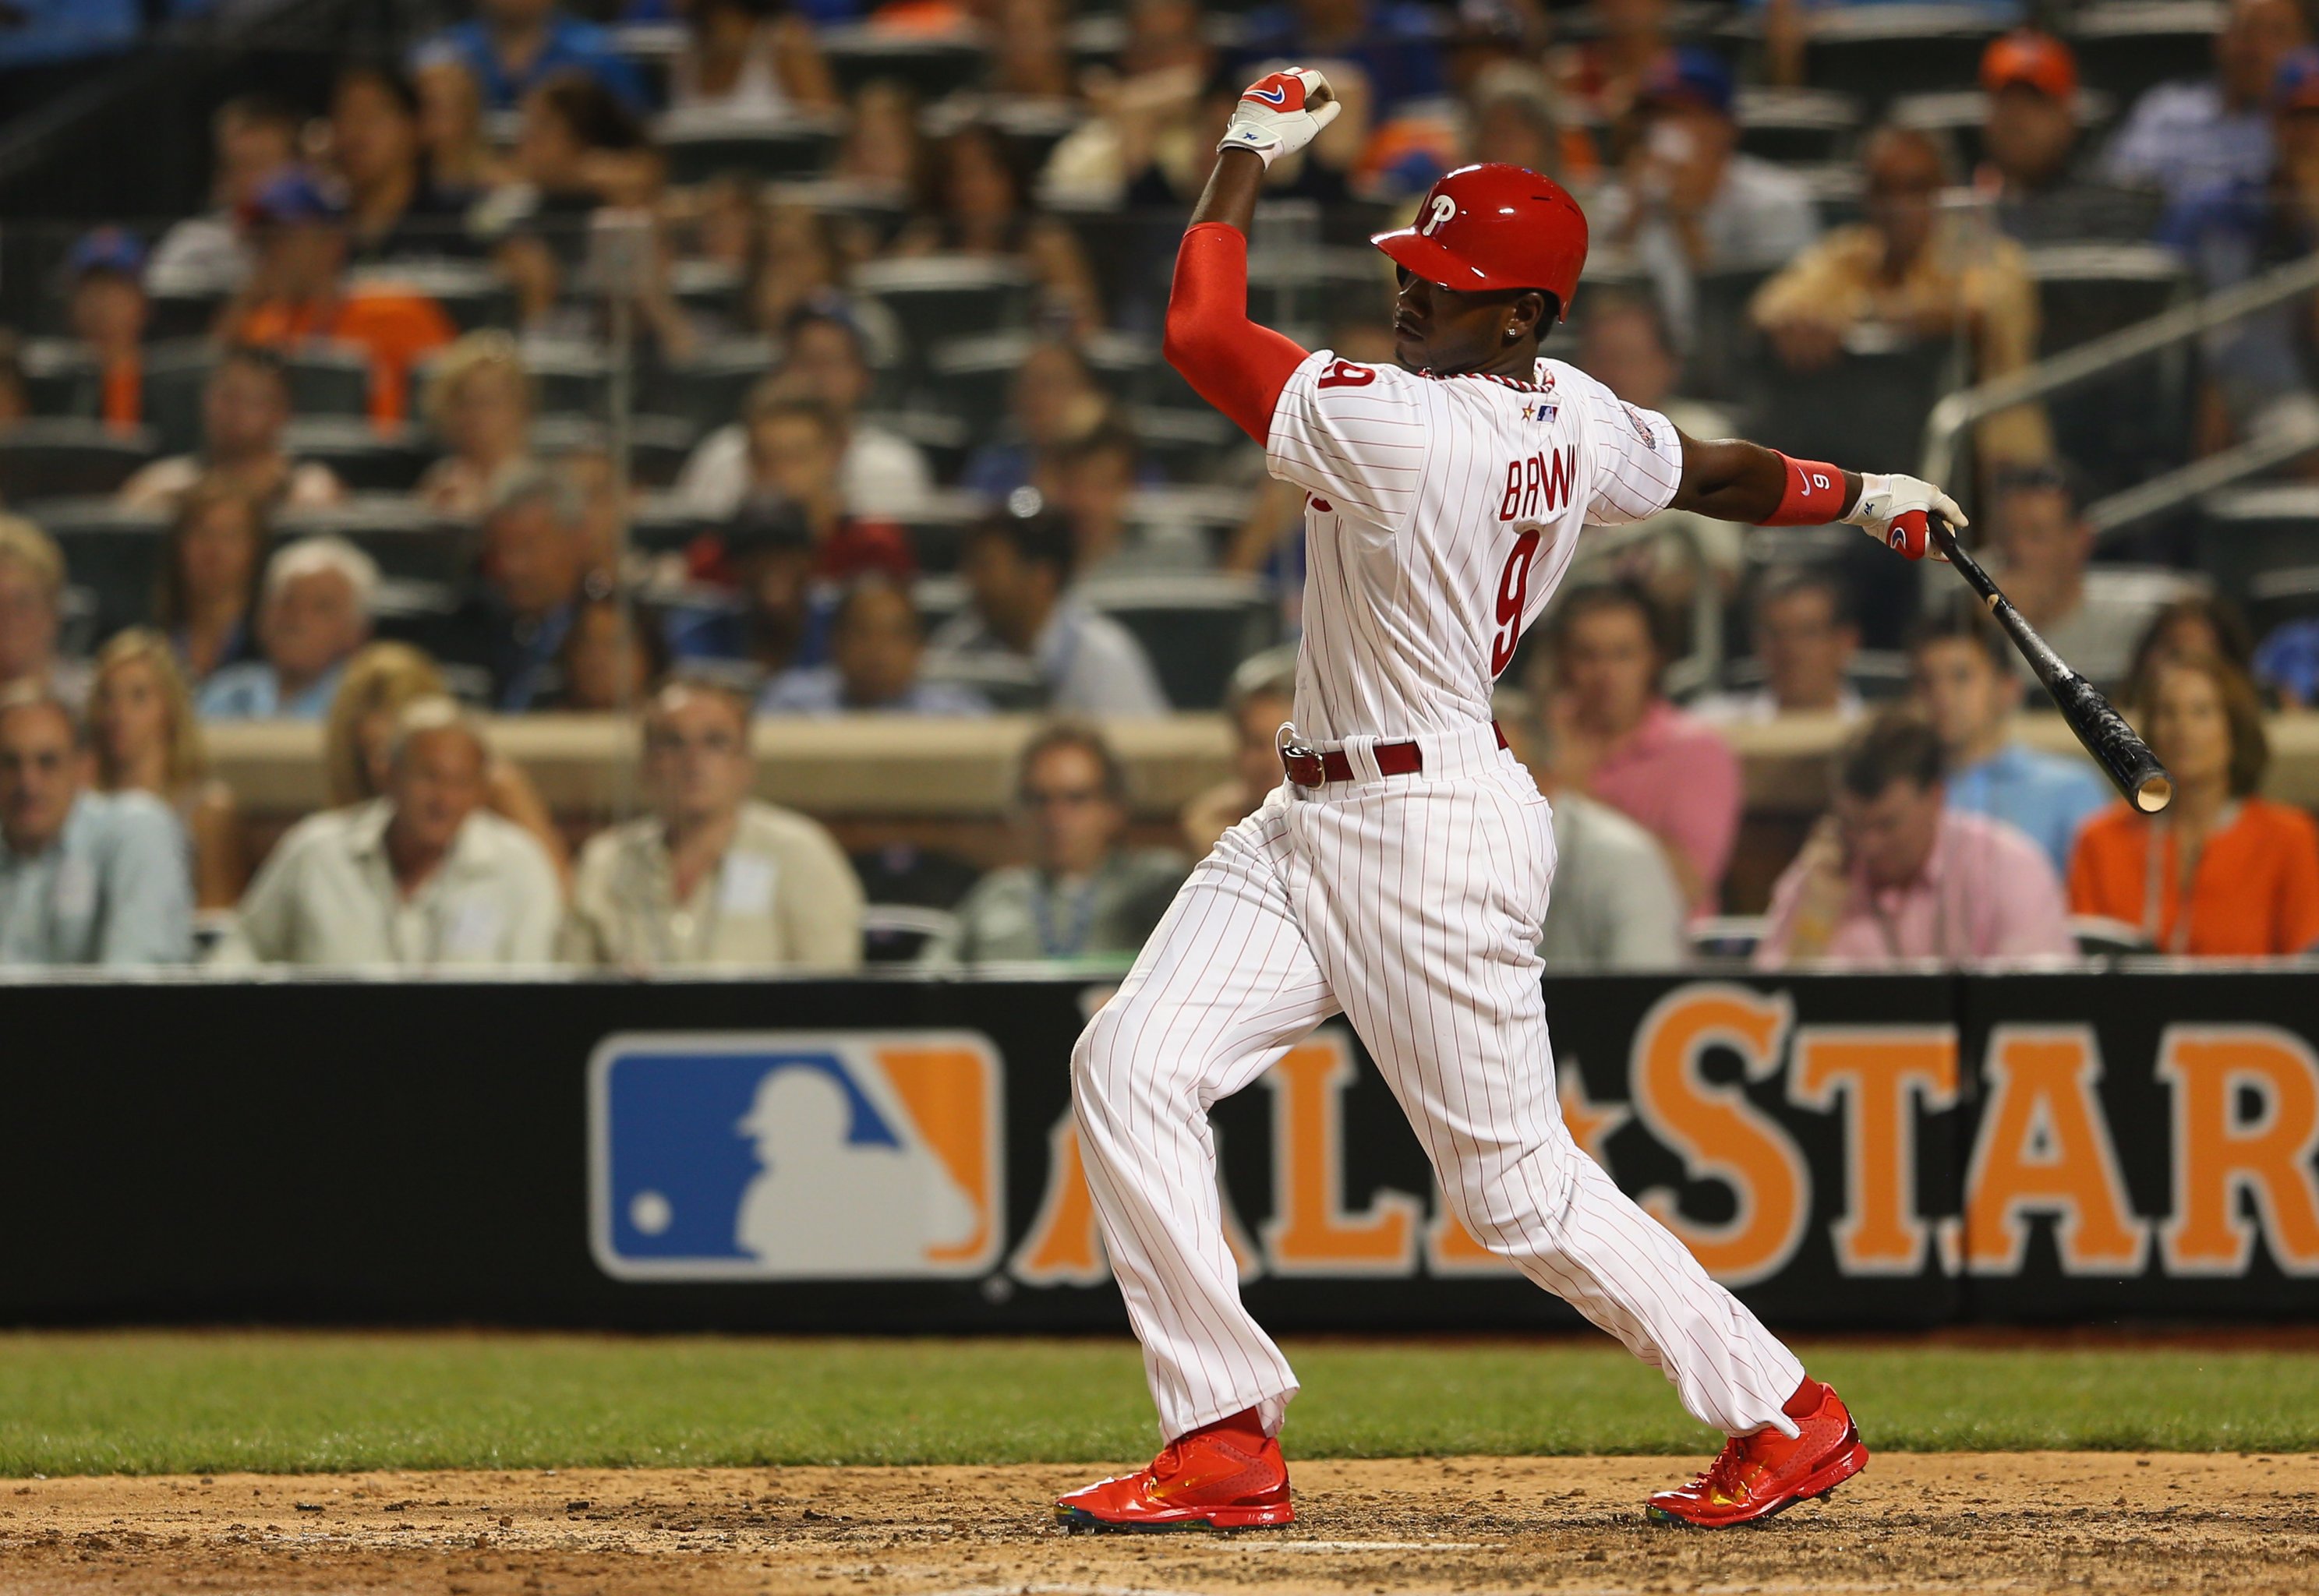 Phillies' Domonic Brown, Cliff Lee compete in the 2013 All-Star Game